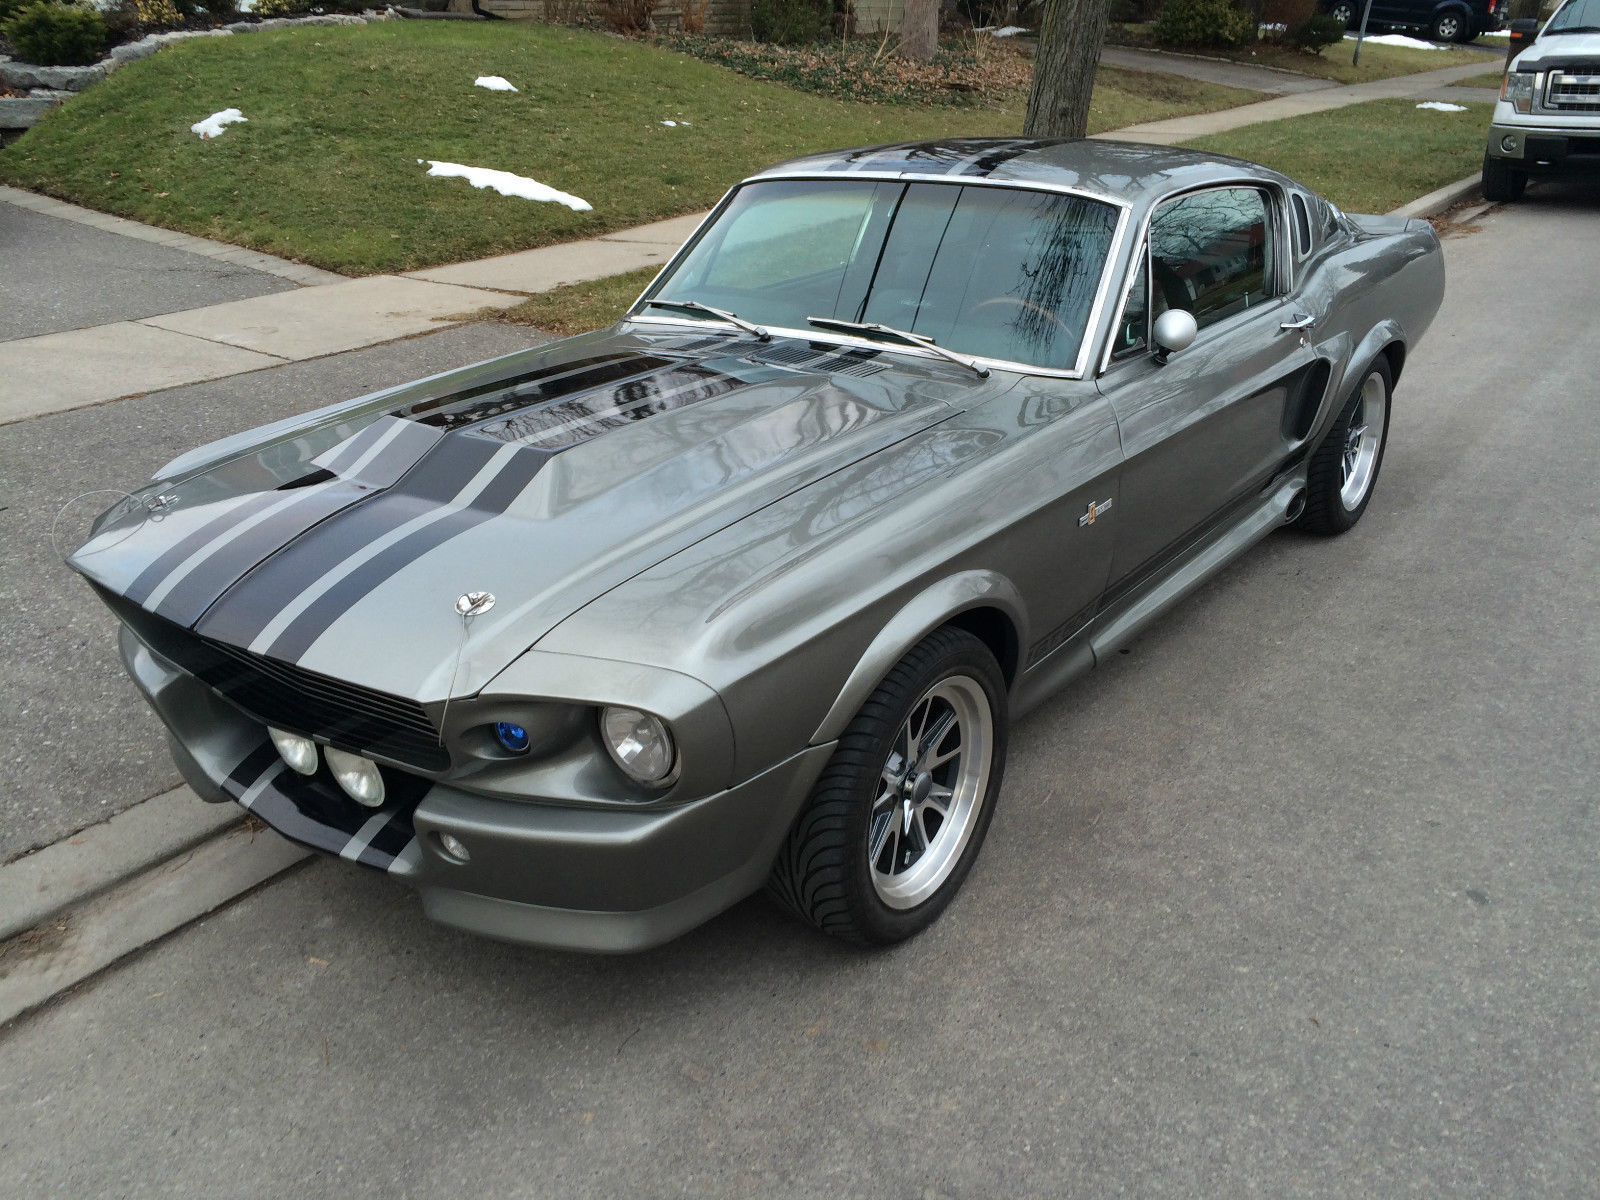 Ford Mustang Shelby Gt500 Eleanor 1967 Olx